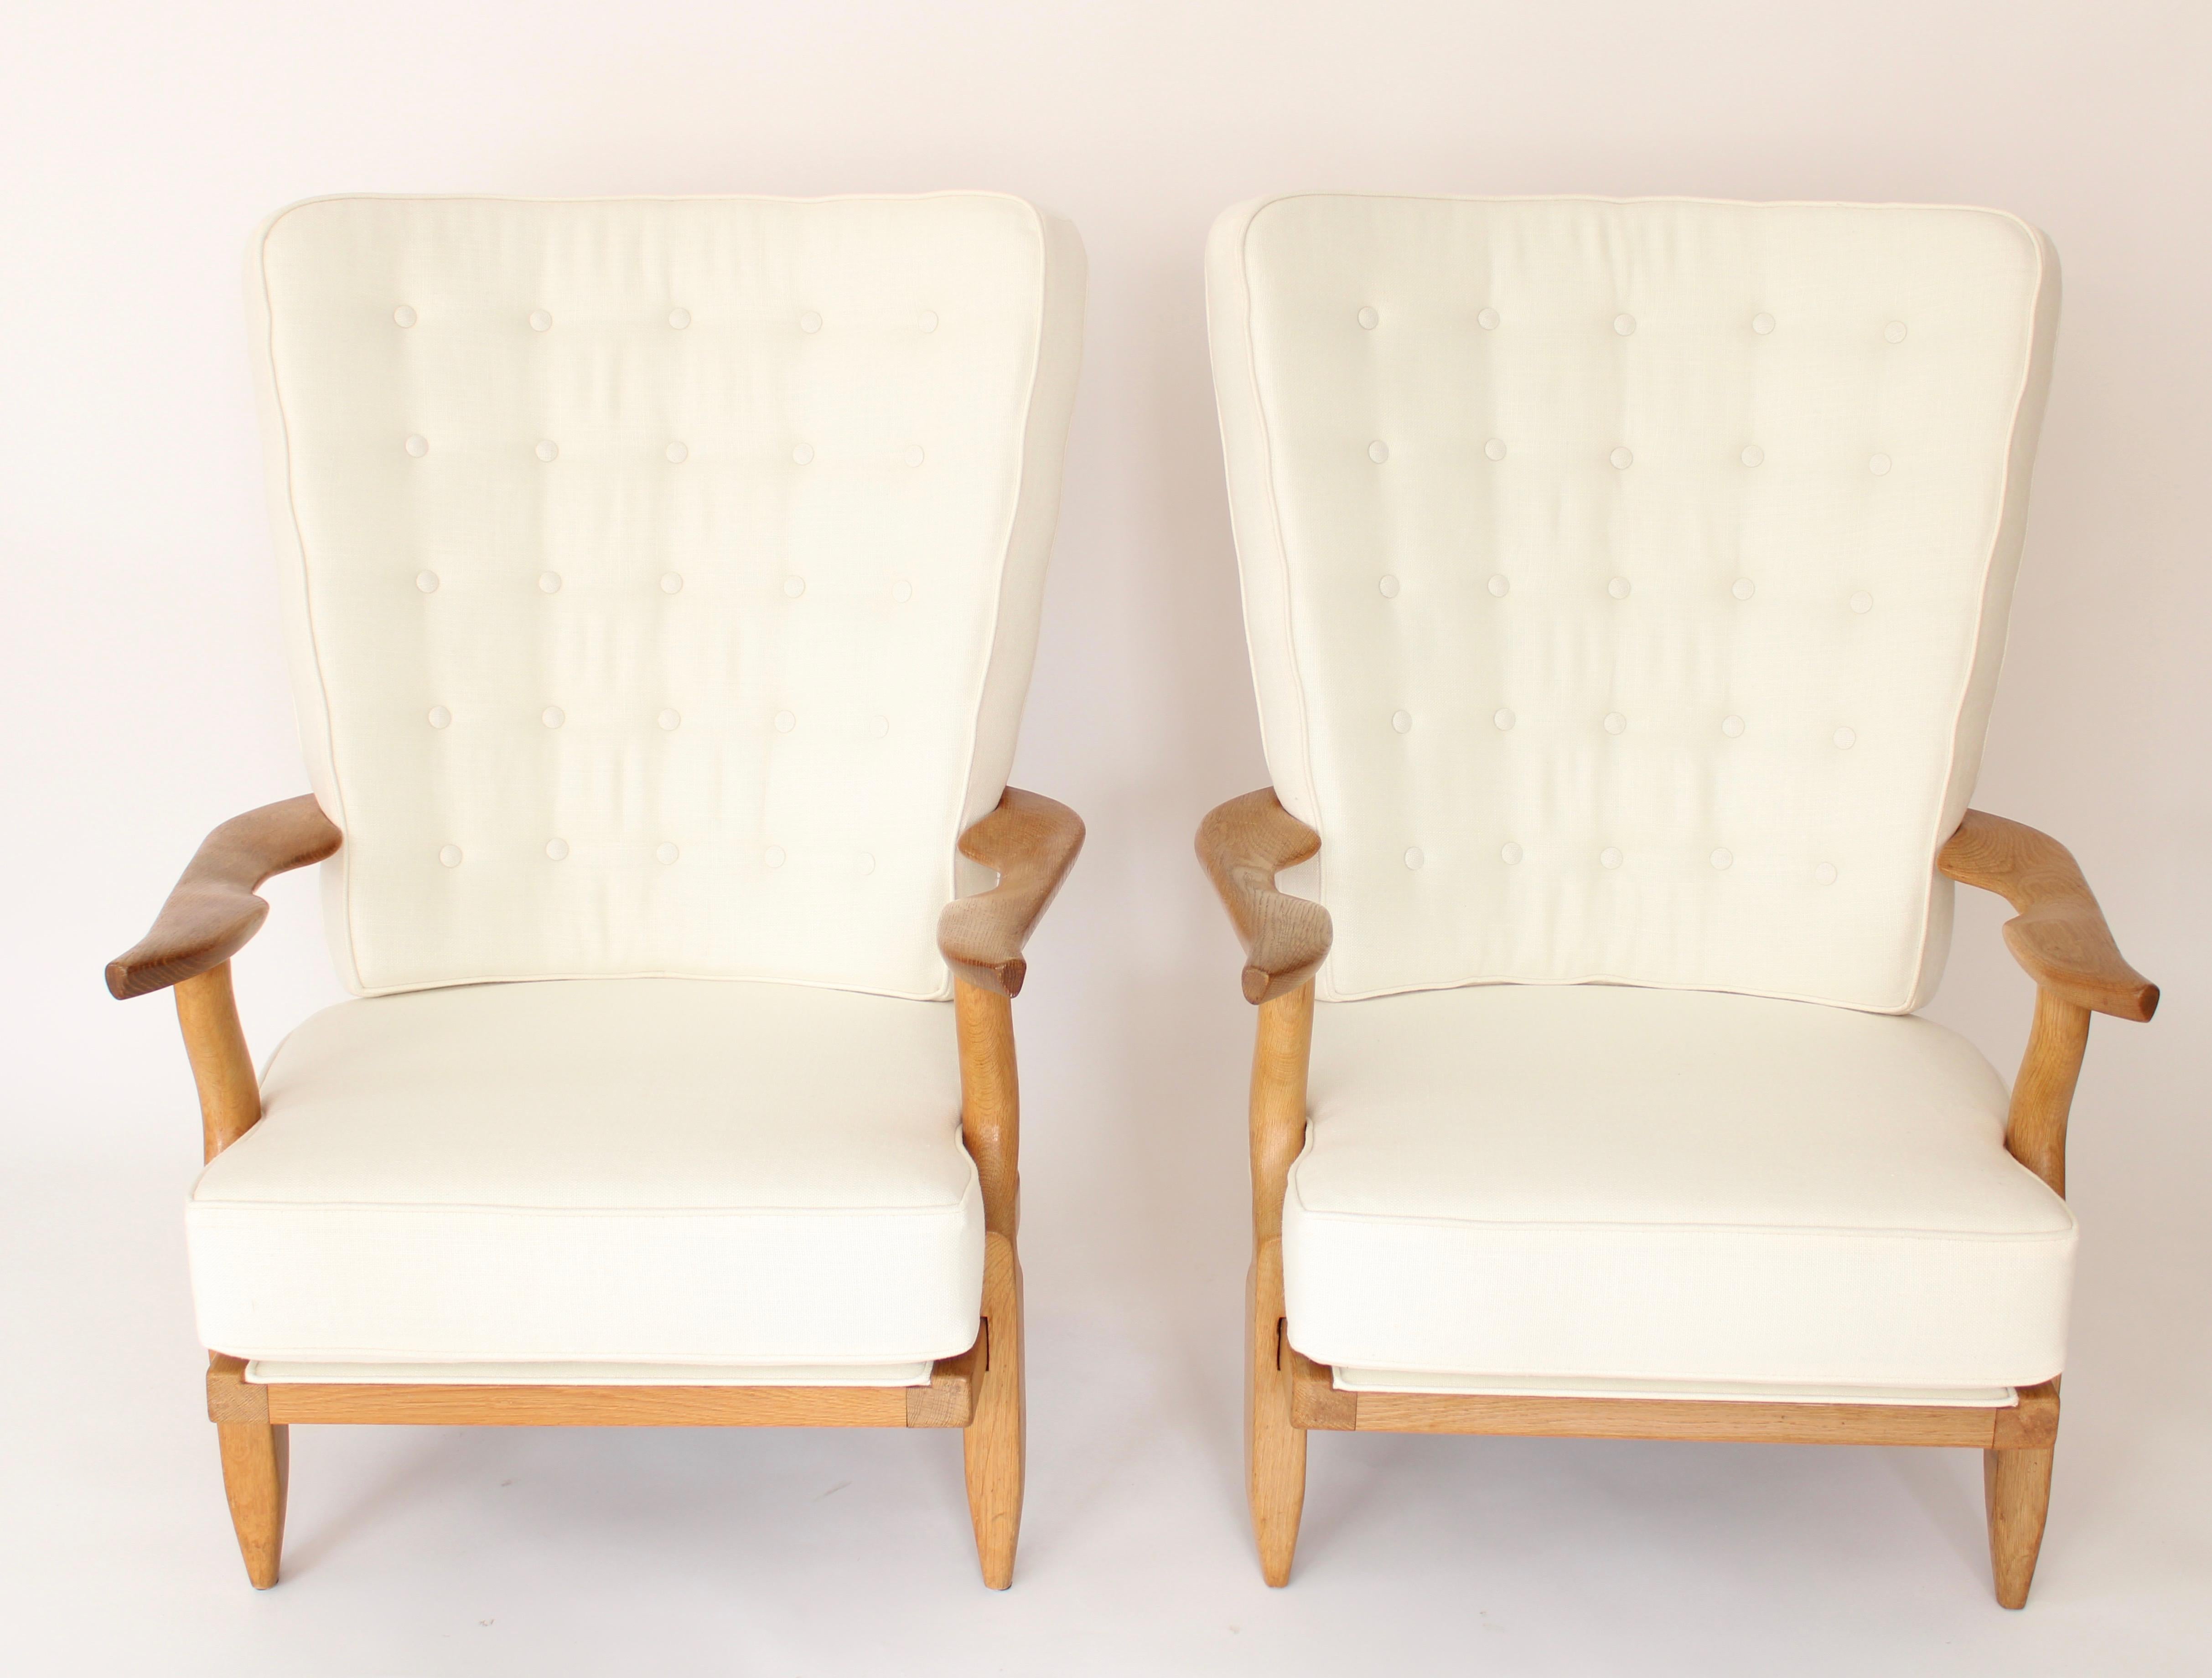 Two extraordinary French Guillerme et Chambron or Guillerme and Chambron high back lounge chairs in solid blonde oak with the typical characteristic long finger motif at the backs for Votre Maison. The 